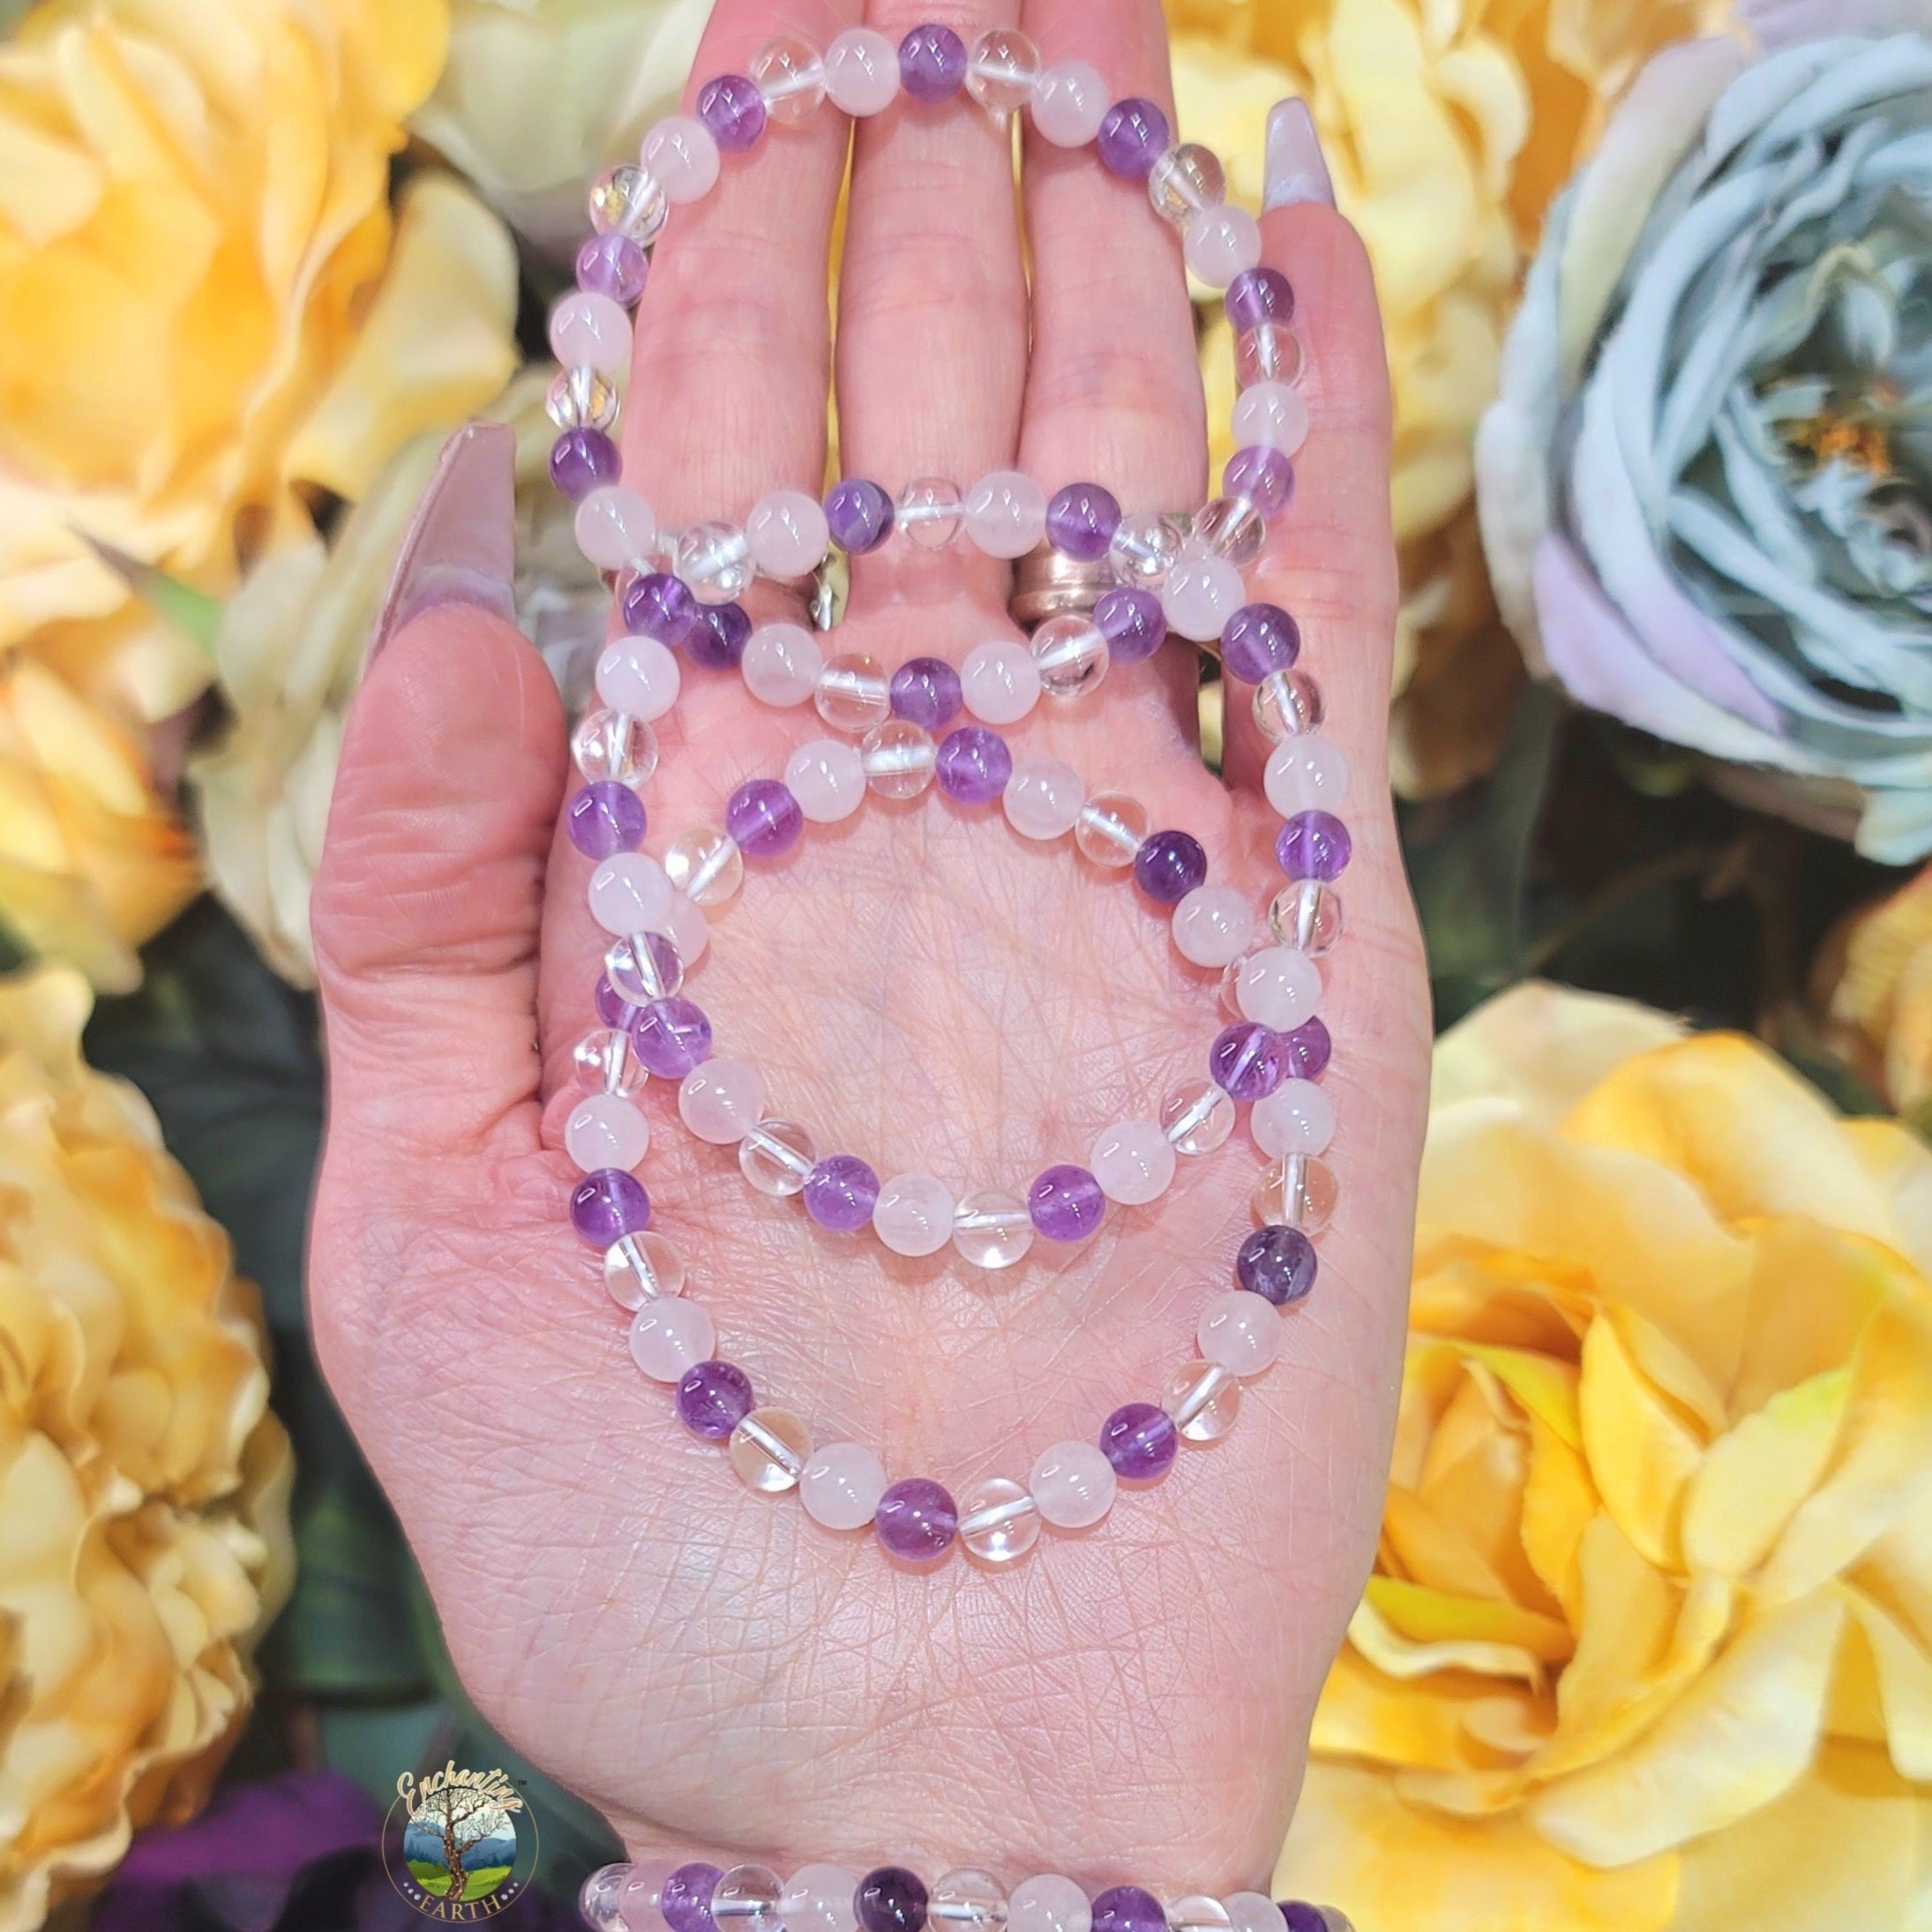 Amethyst, Clear Quartz and Rose Quartz Bracelet for Intuition, Love and Manifesting Your Desires